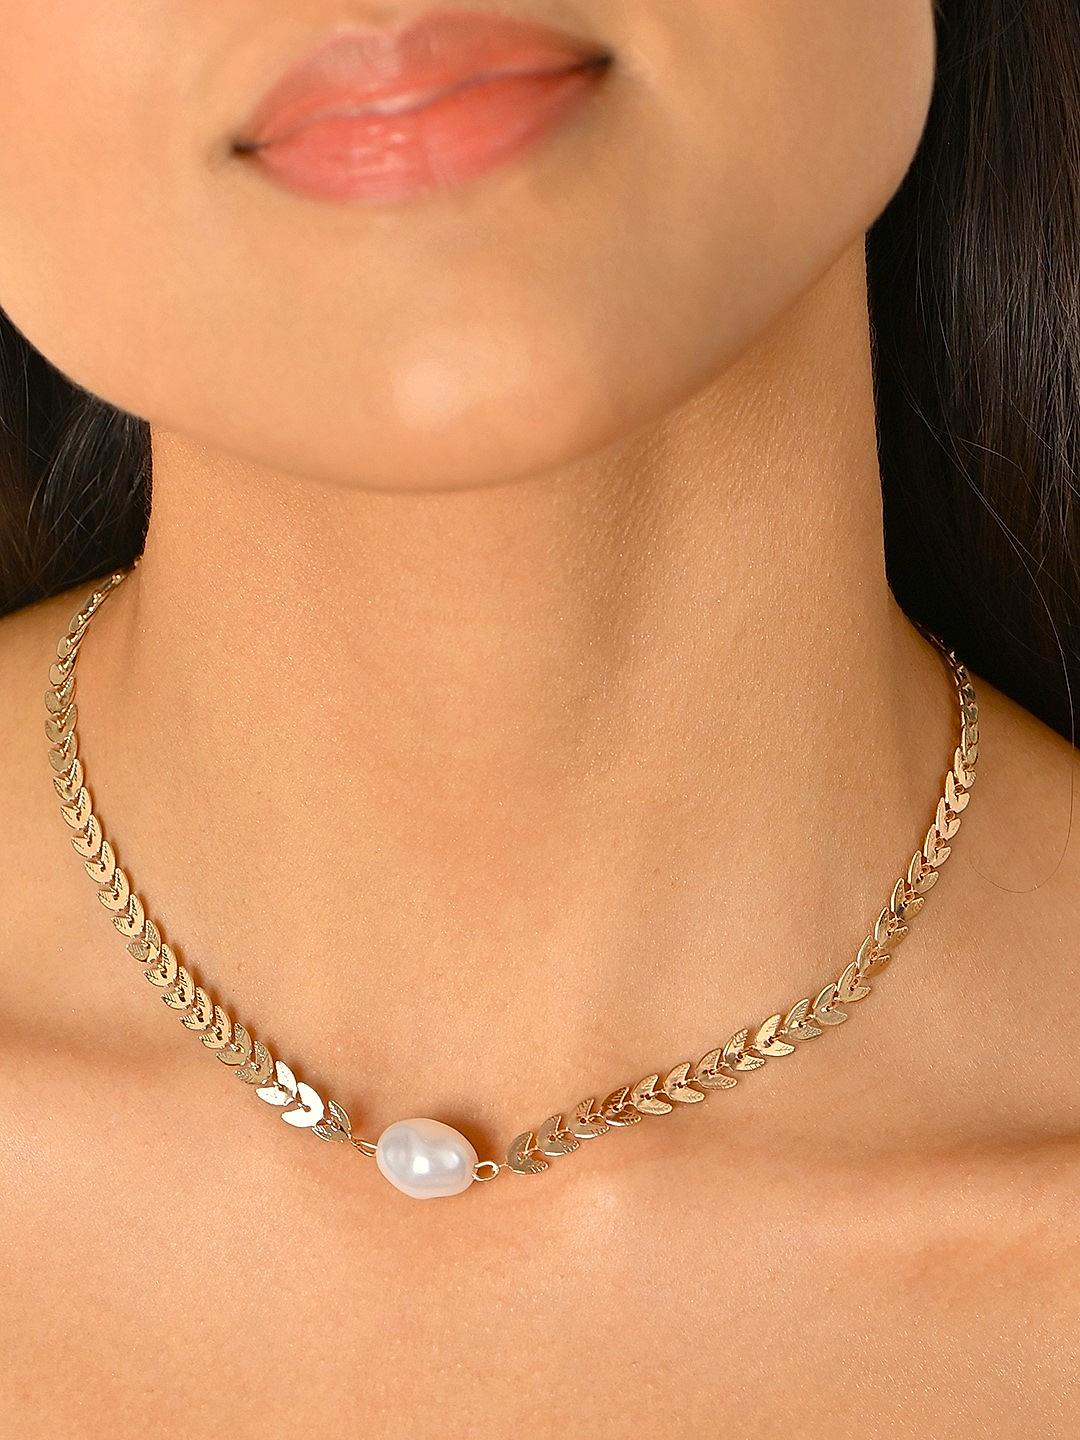 Buy Single Pearl Gold Necklace With 14k Gold Chain, Freshwater Pearl  Necklace, Quality Cultured White Pearl, Wedding Pearl Necklace, Pearl Gold  Online in India - Etsy